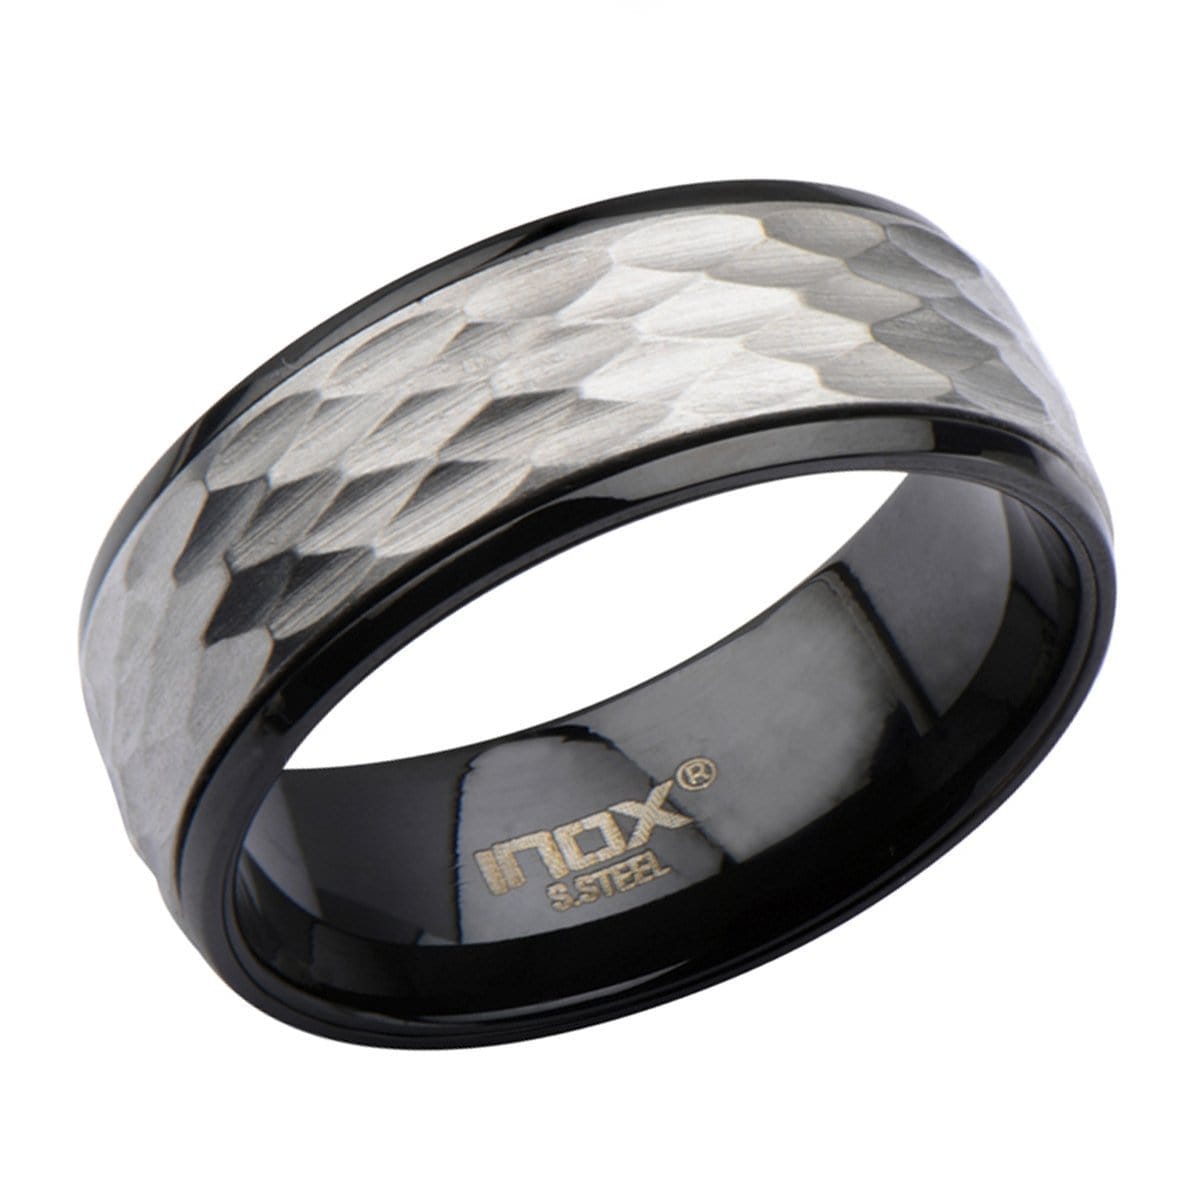 INOX JEWELRY Rings Black and Silver Tone Stainless Steel Dented Easy-Grip Spinner Ring